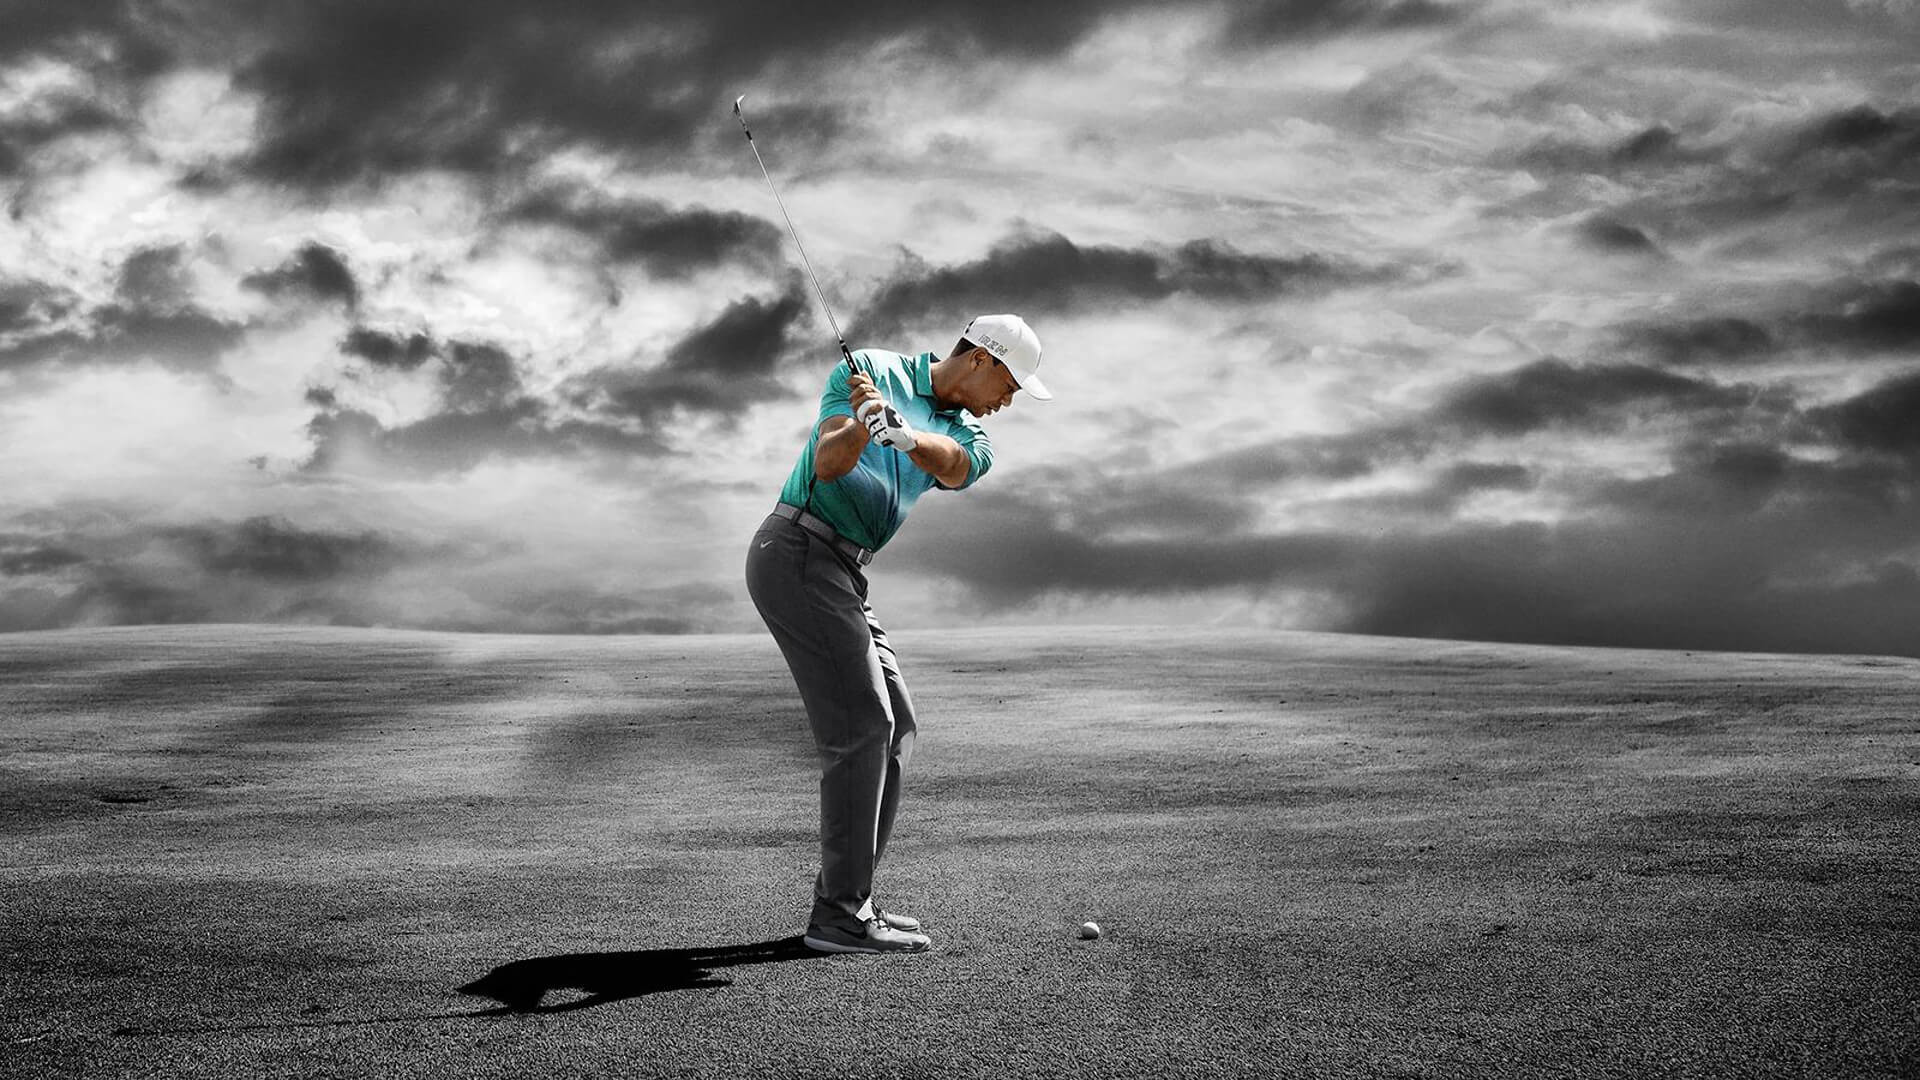 Tiger Woods Wallpapers Images